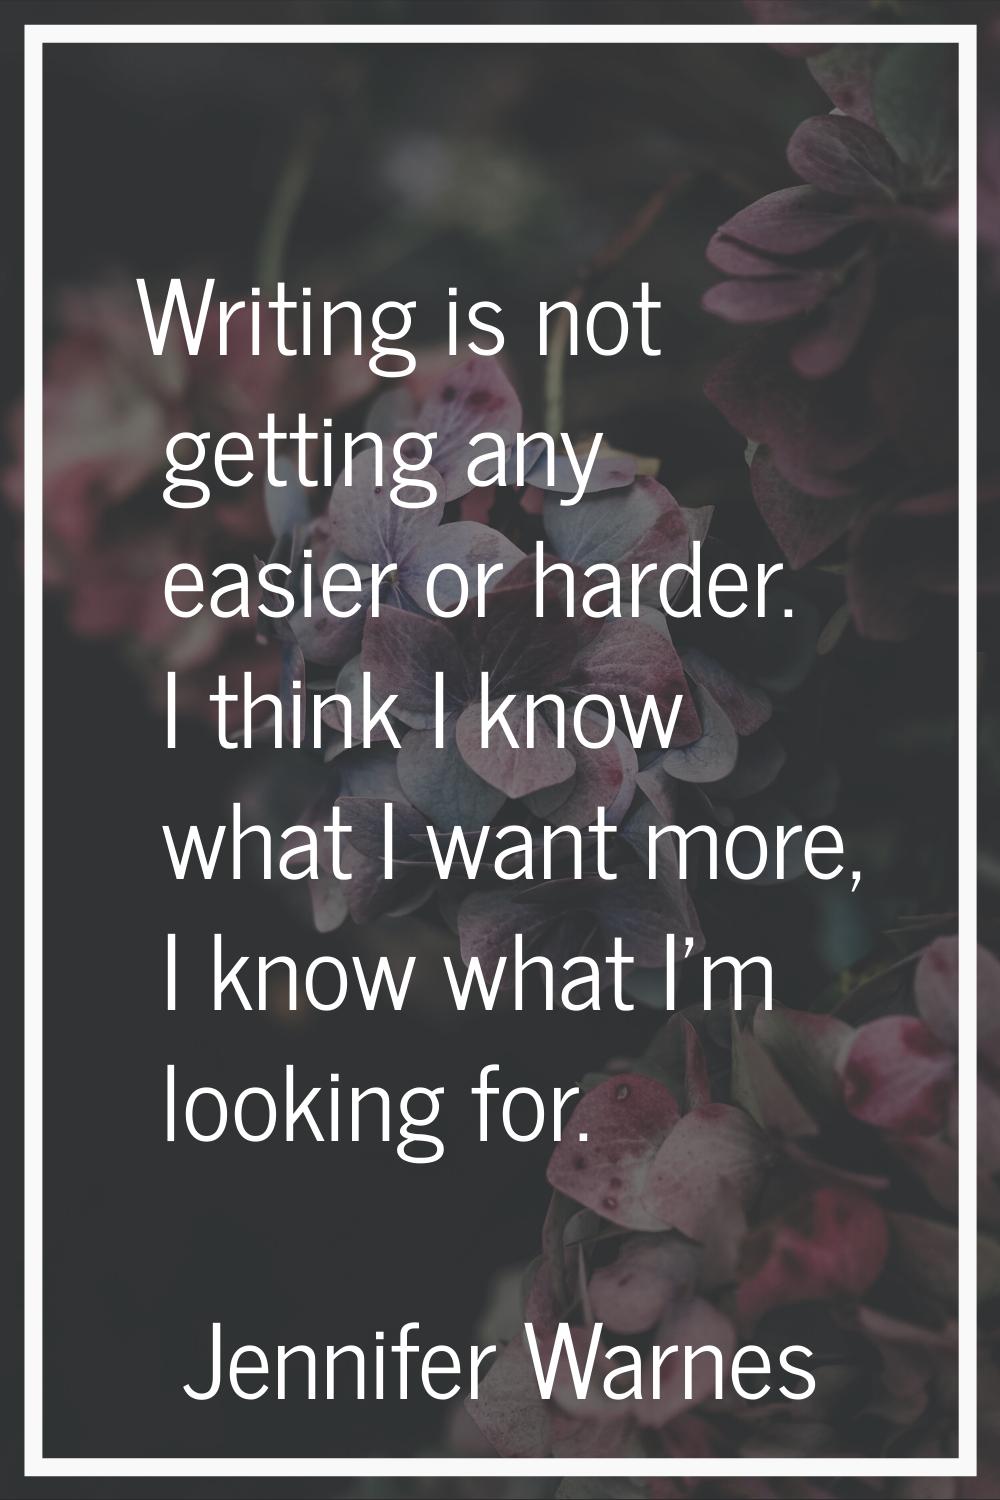 Writing is not getting any easier or harder. I think I know what I want more, I know what I'm looki